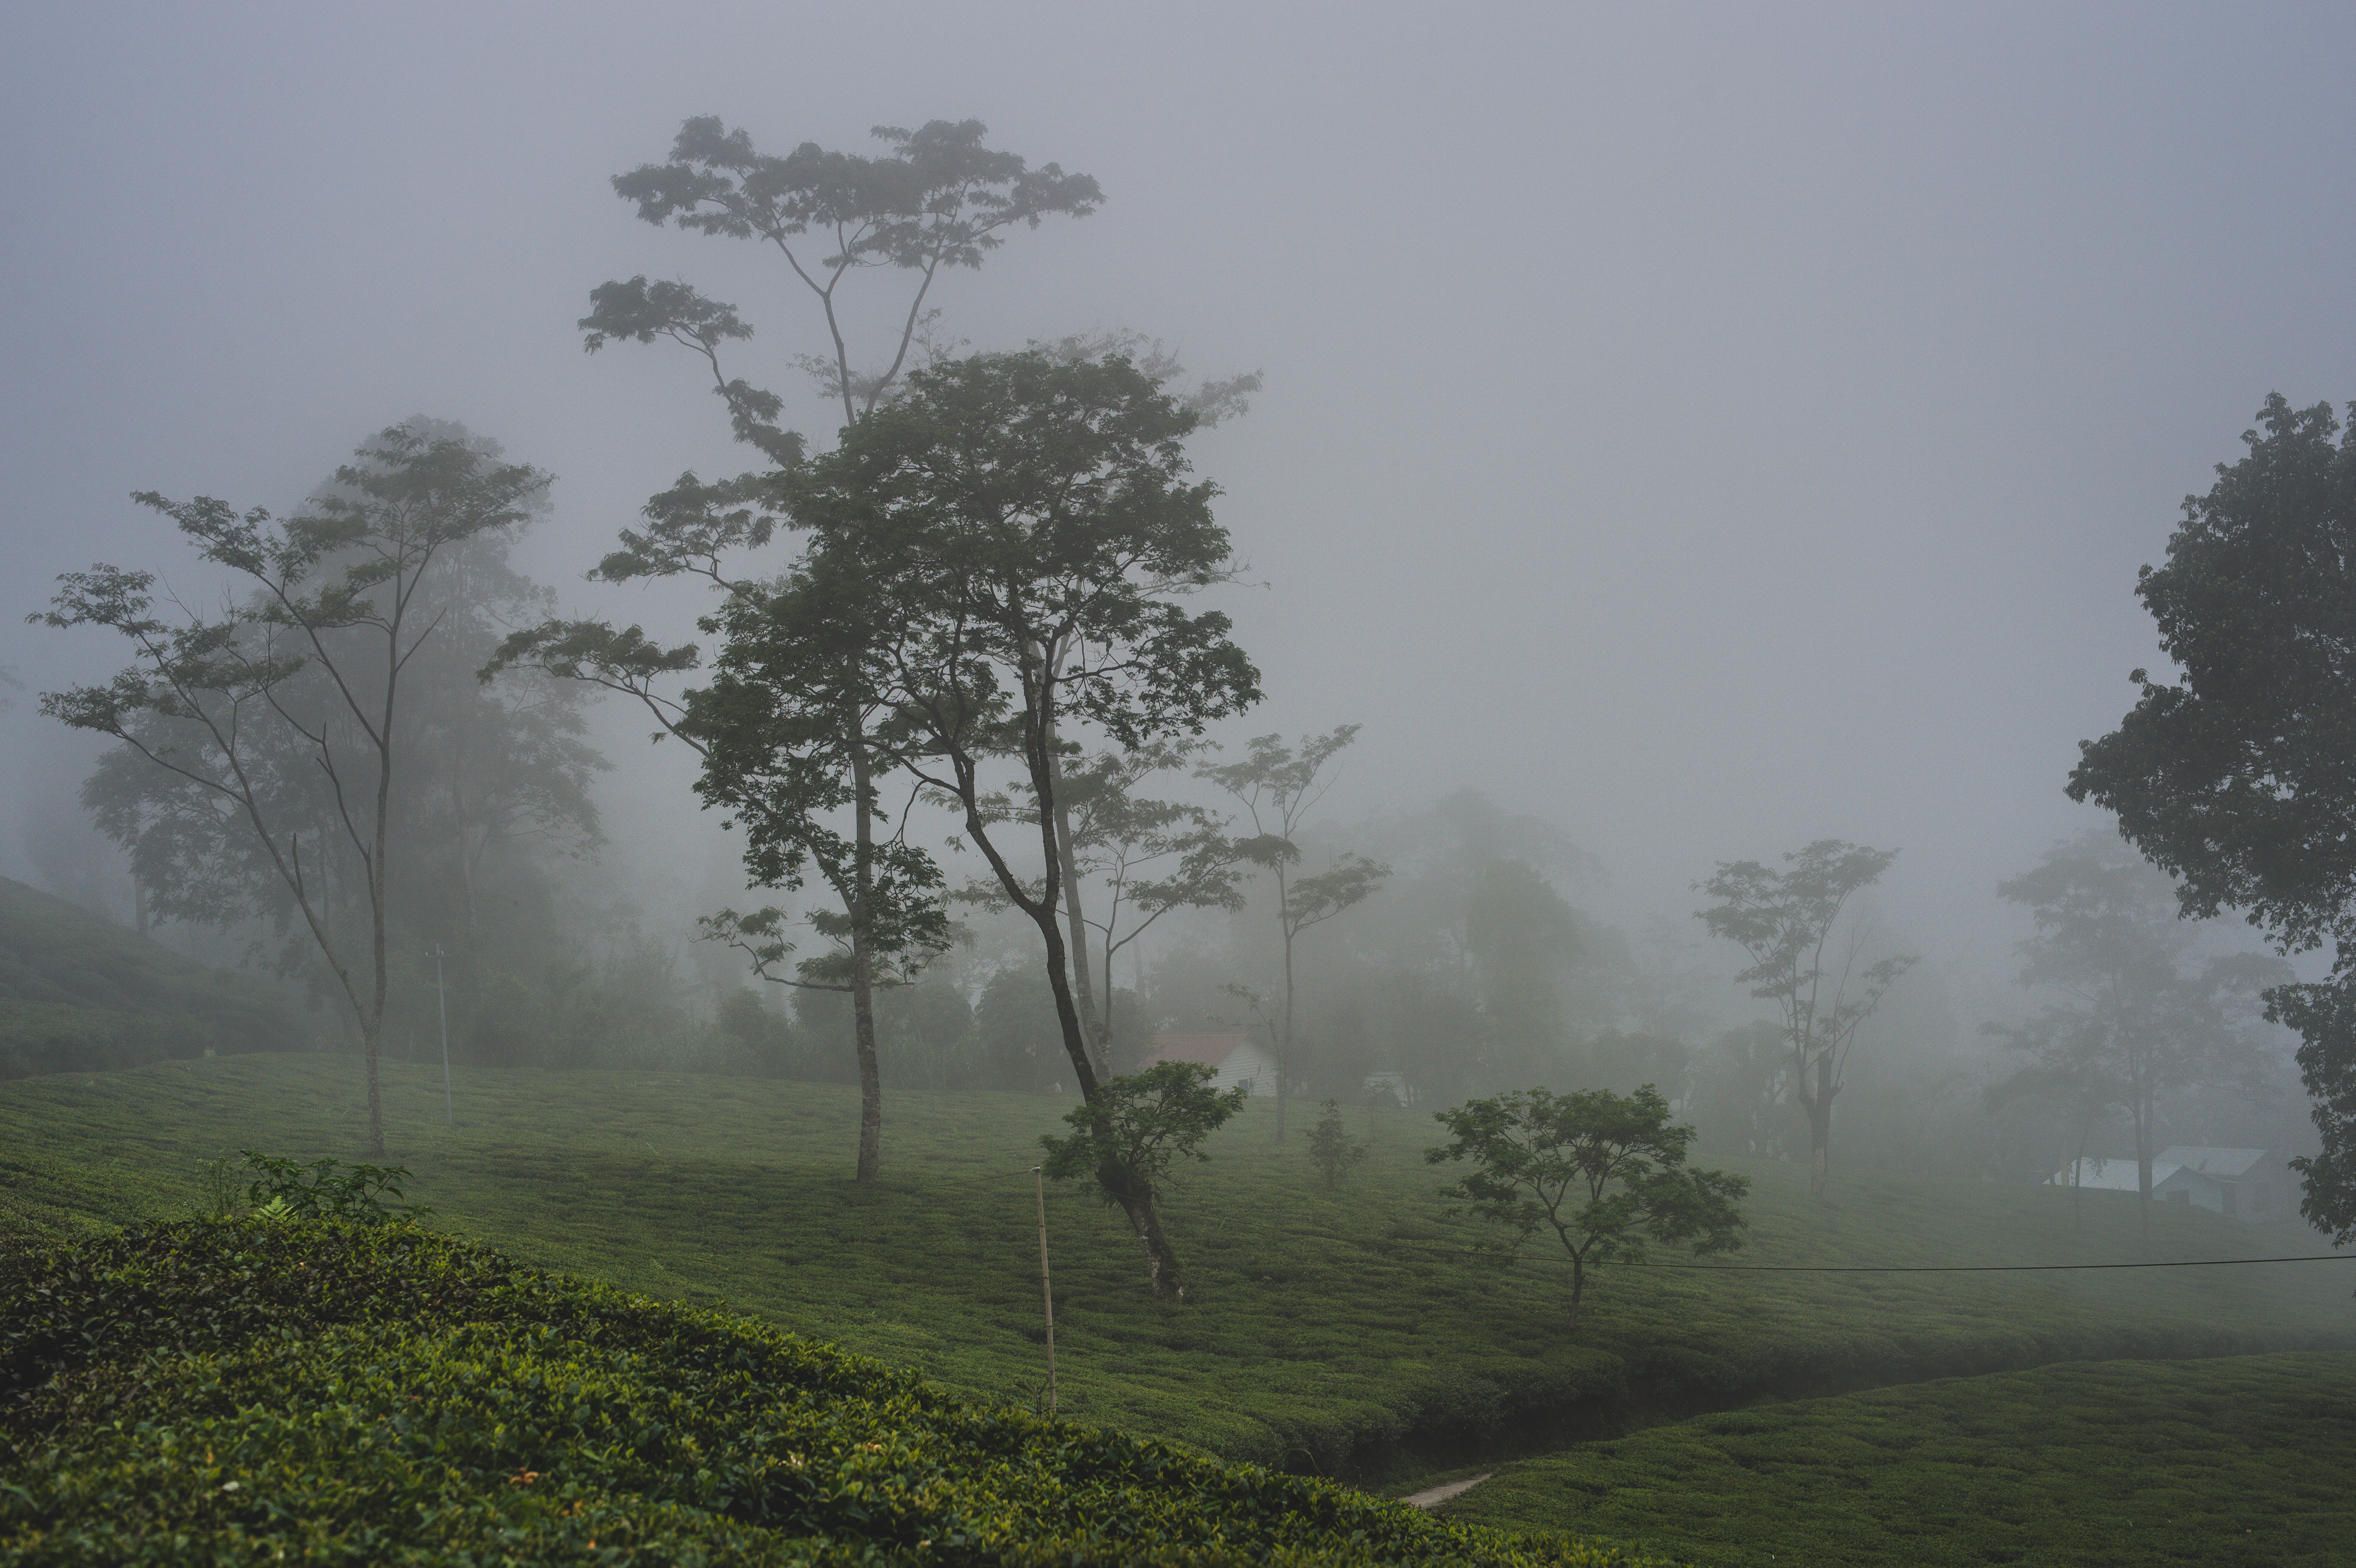 Singpho Phalap - The Dark Tea from Assam: Discovering the Richness of Assam Tea Culture